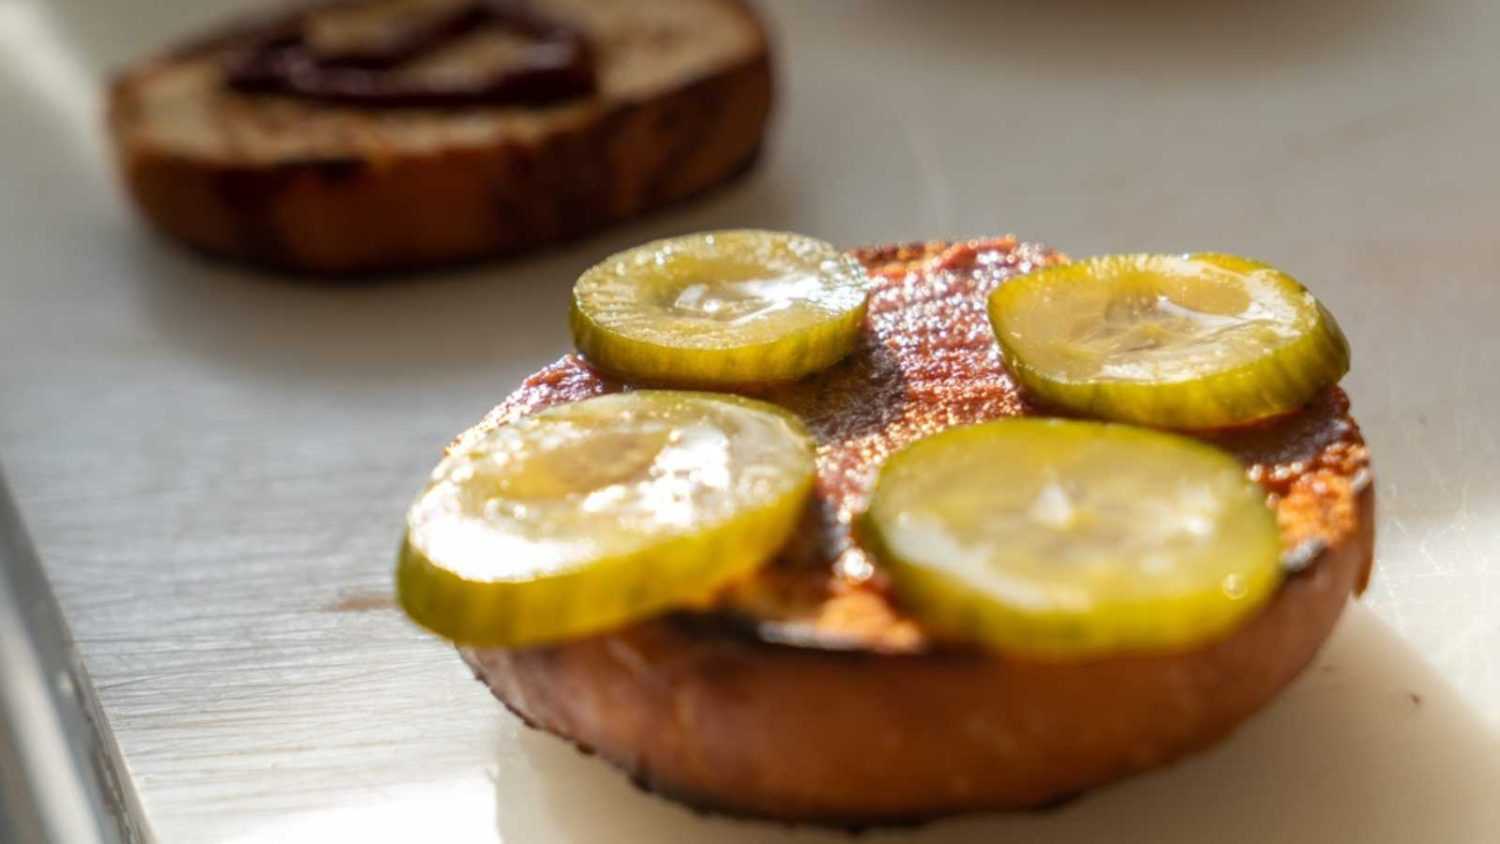 Round slices of pickles are placed on the ketchup-smeared hamburger bun. preparing a hamburger